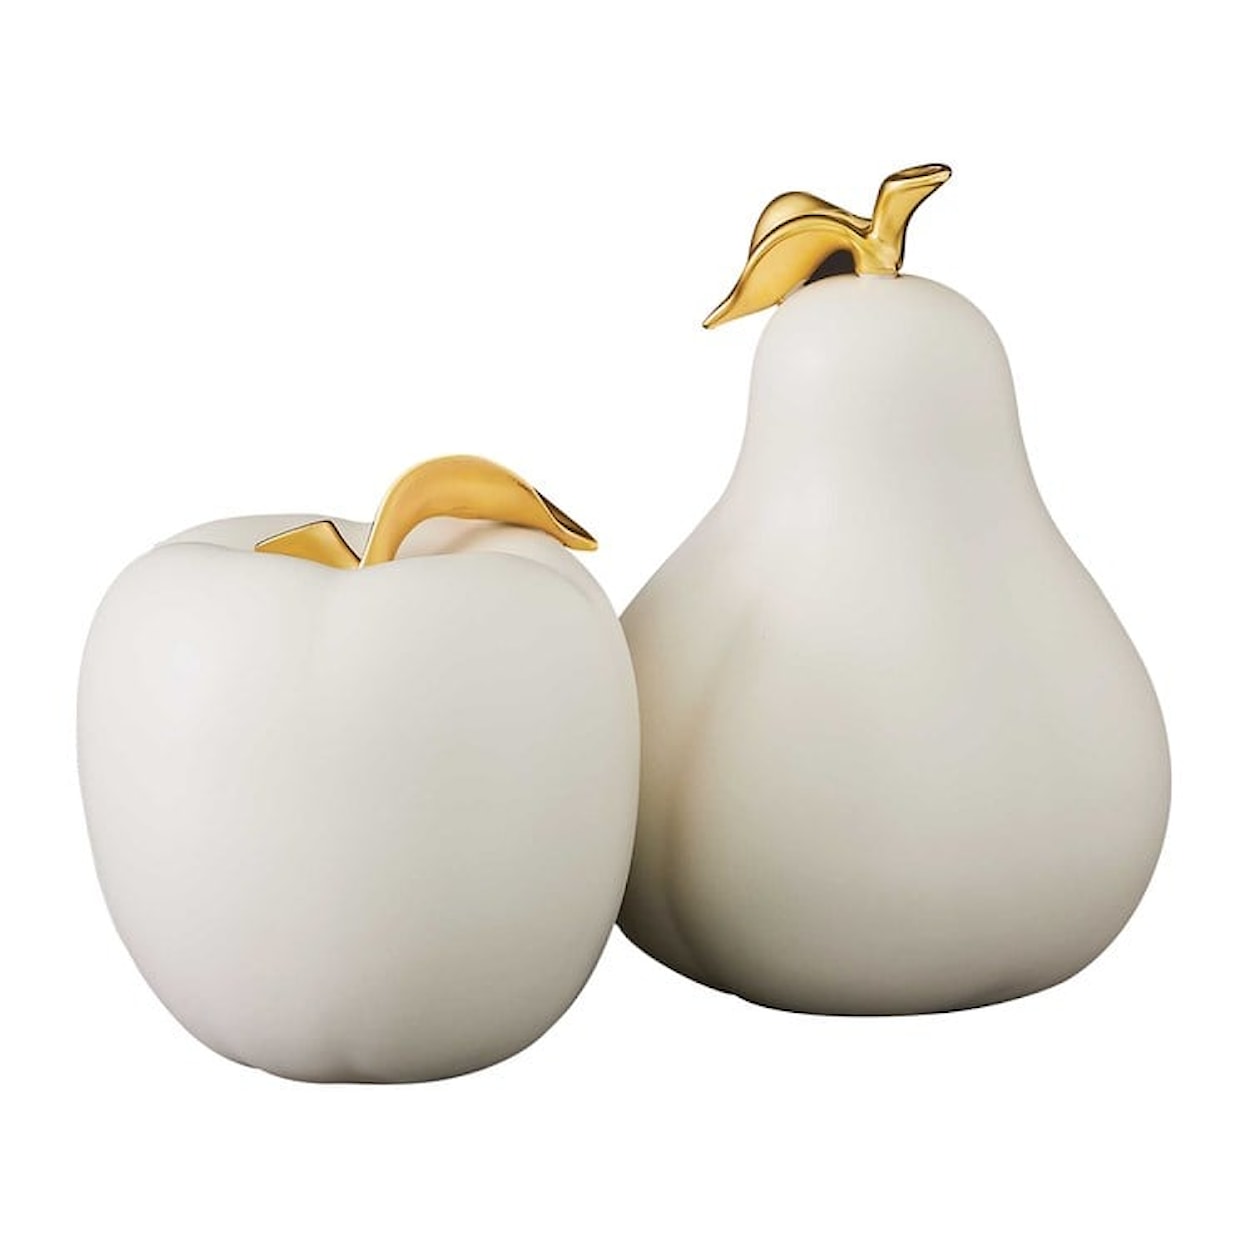 Uttermost Revelations APPLE AND PEAR SCULPTURES, S/2